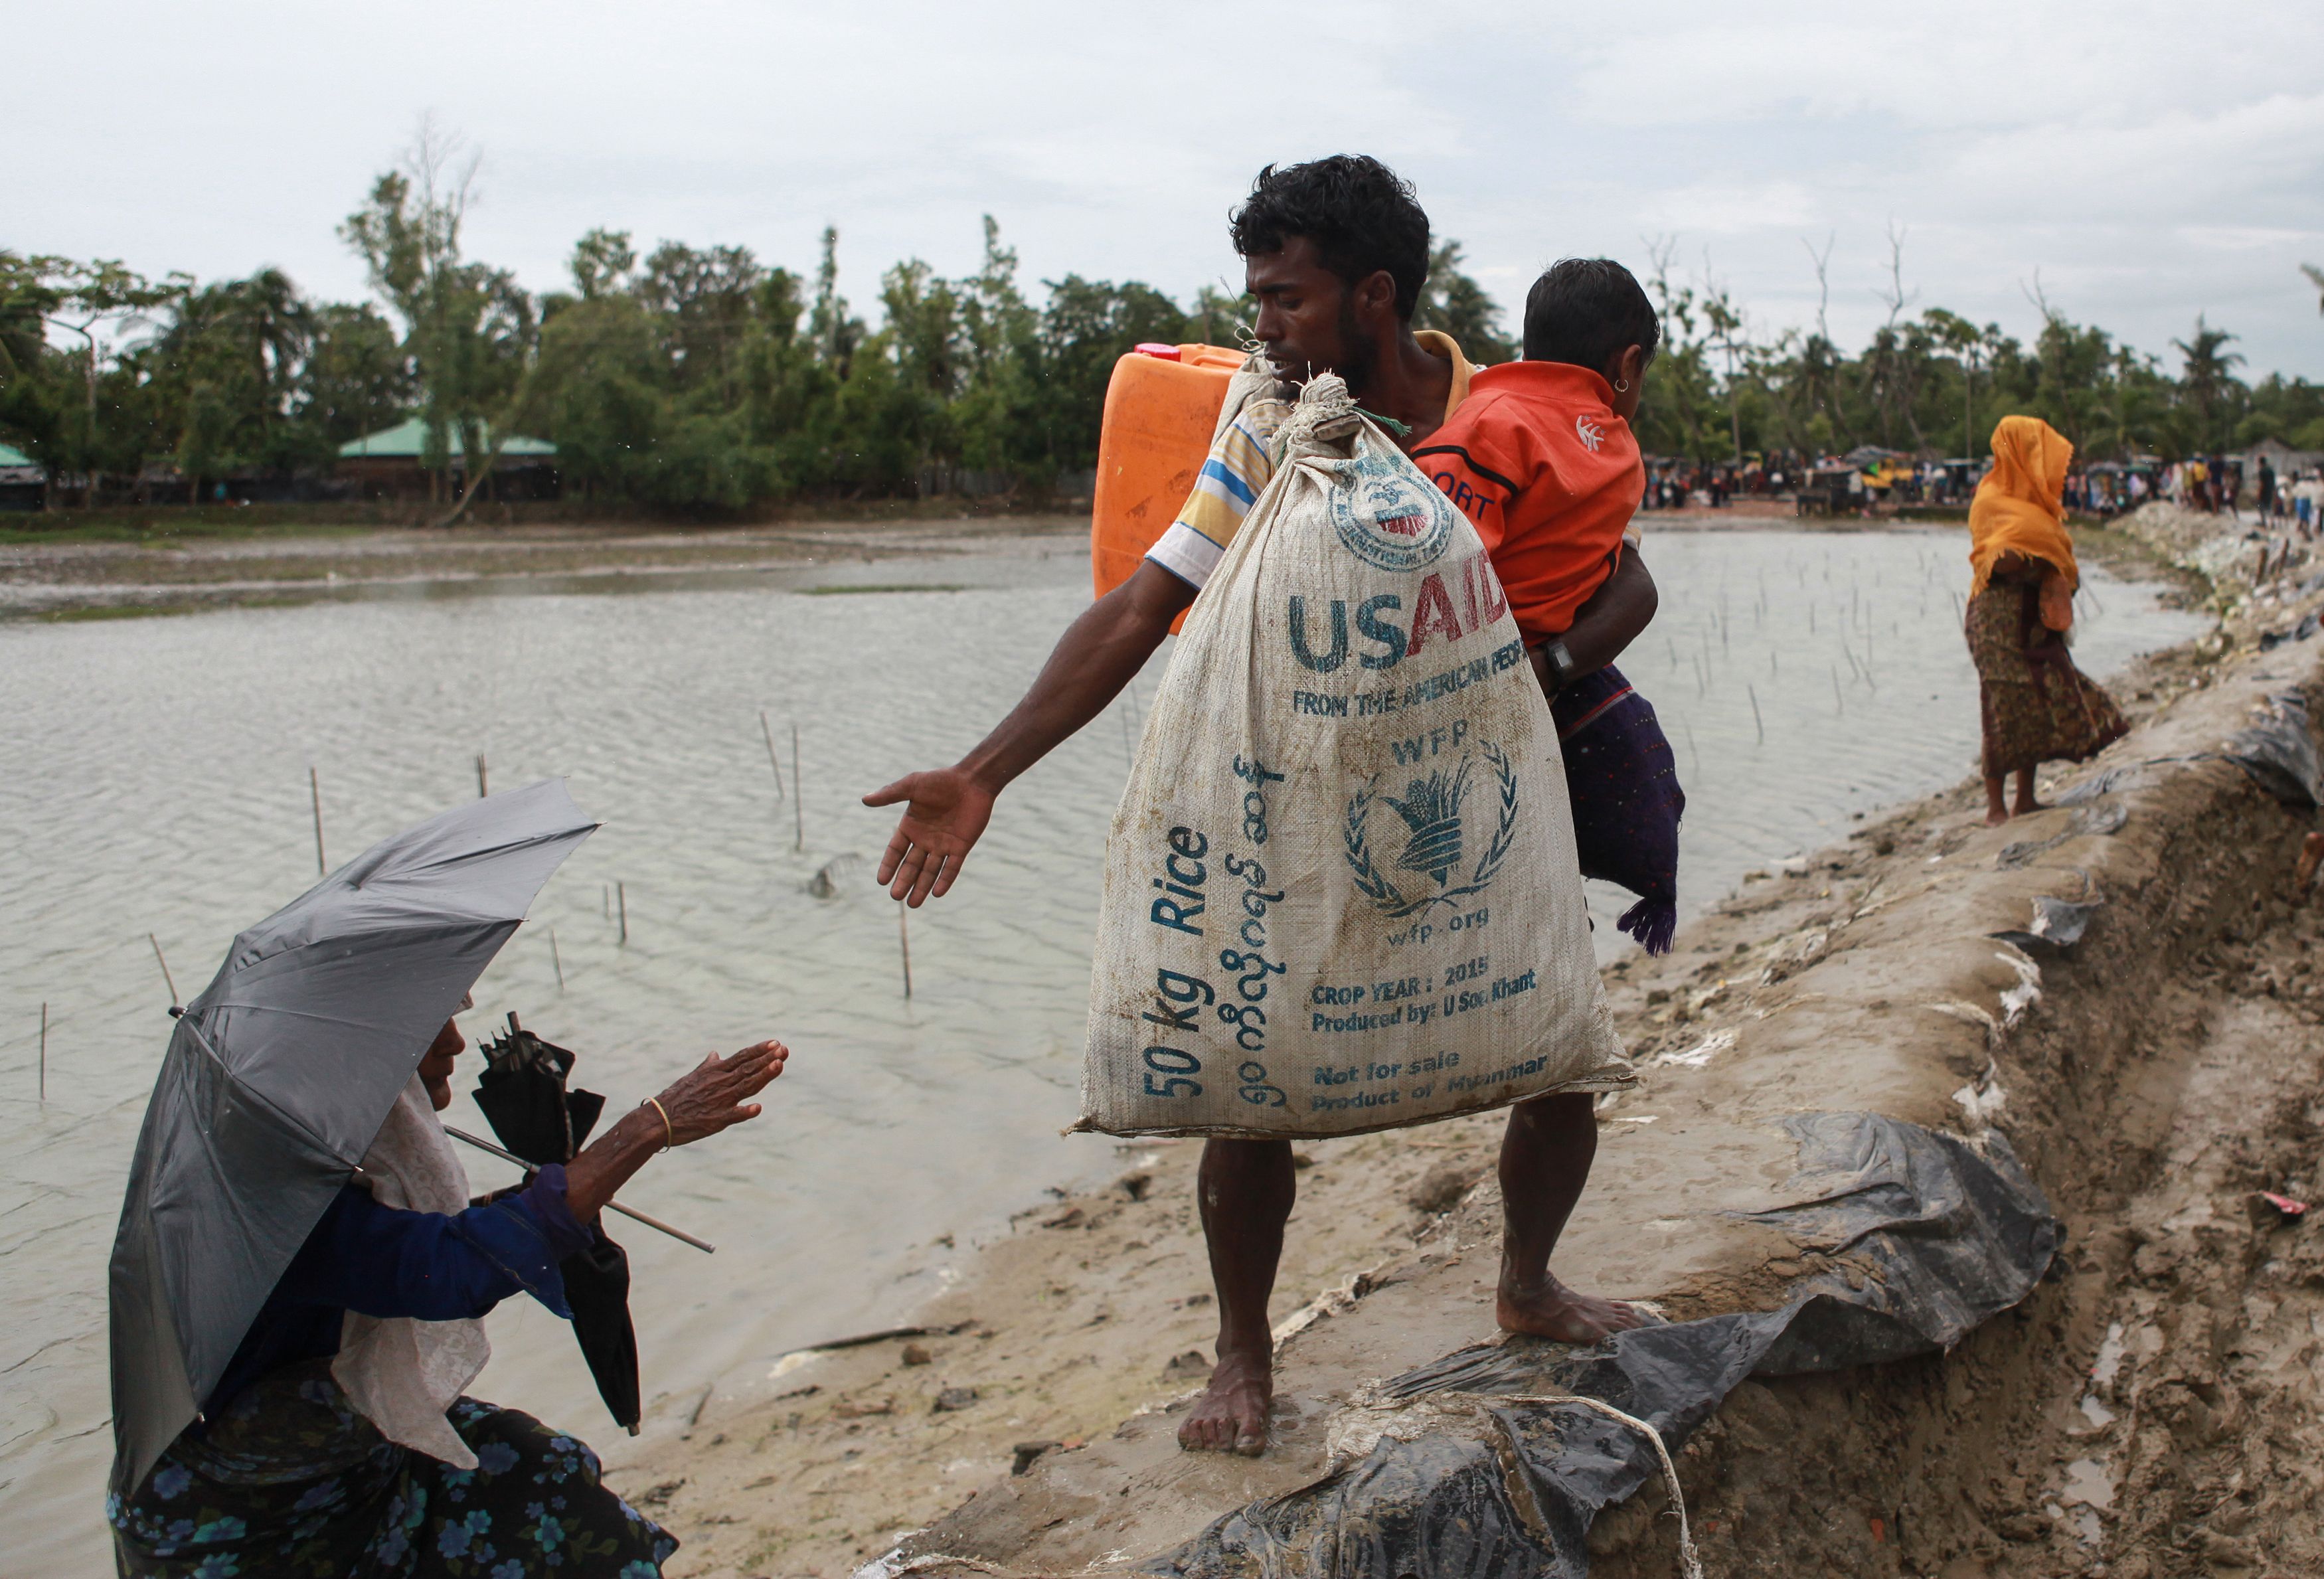 A man with an orange pack on his back and carrying a large white bag stamped with the letters USAID reaches down to give a woman holding an umbrella a hand up a riverbank.